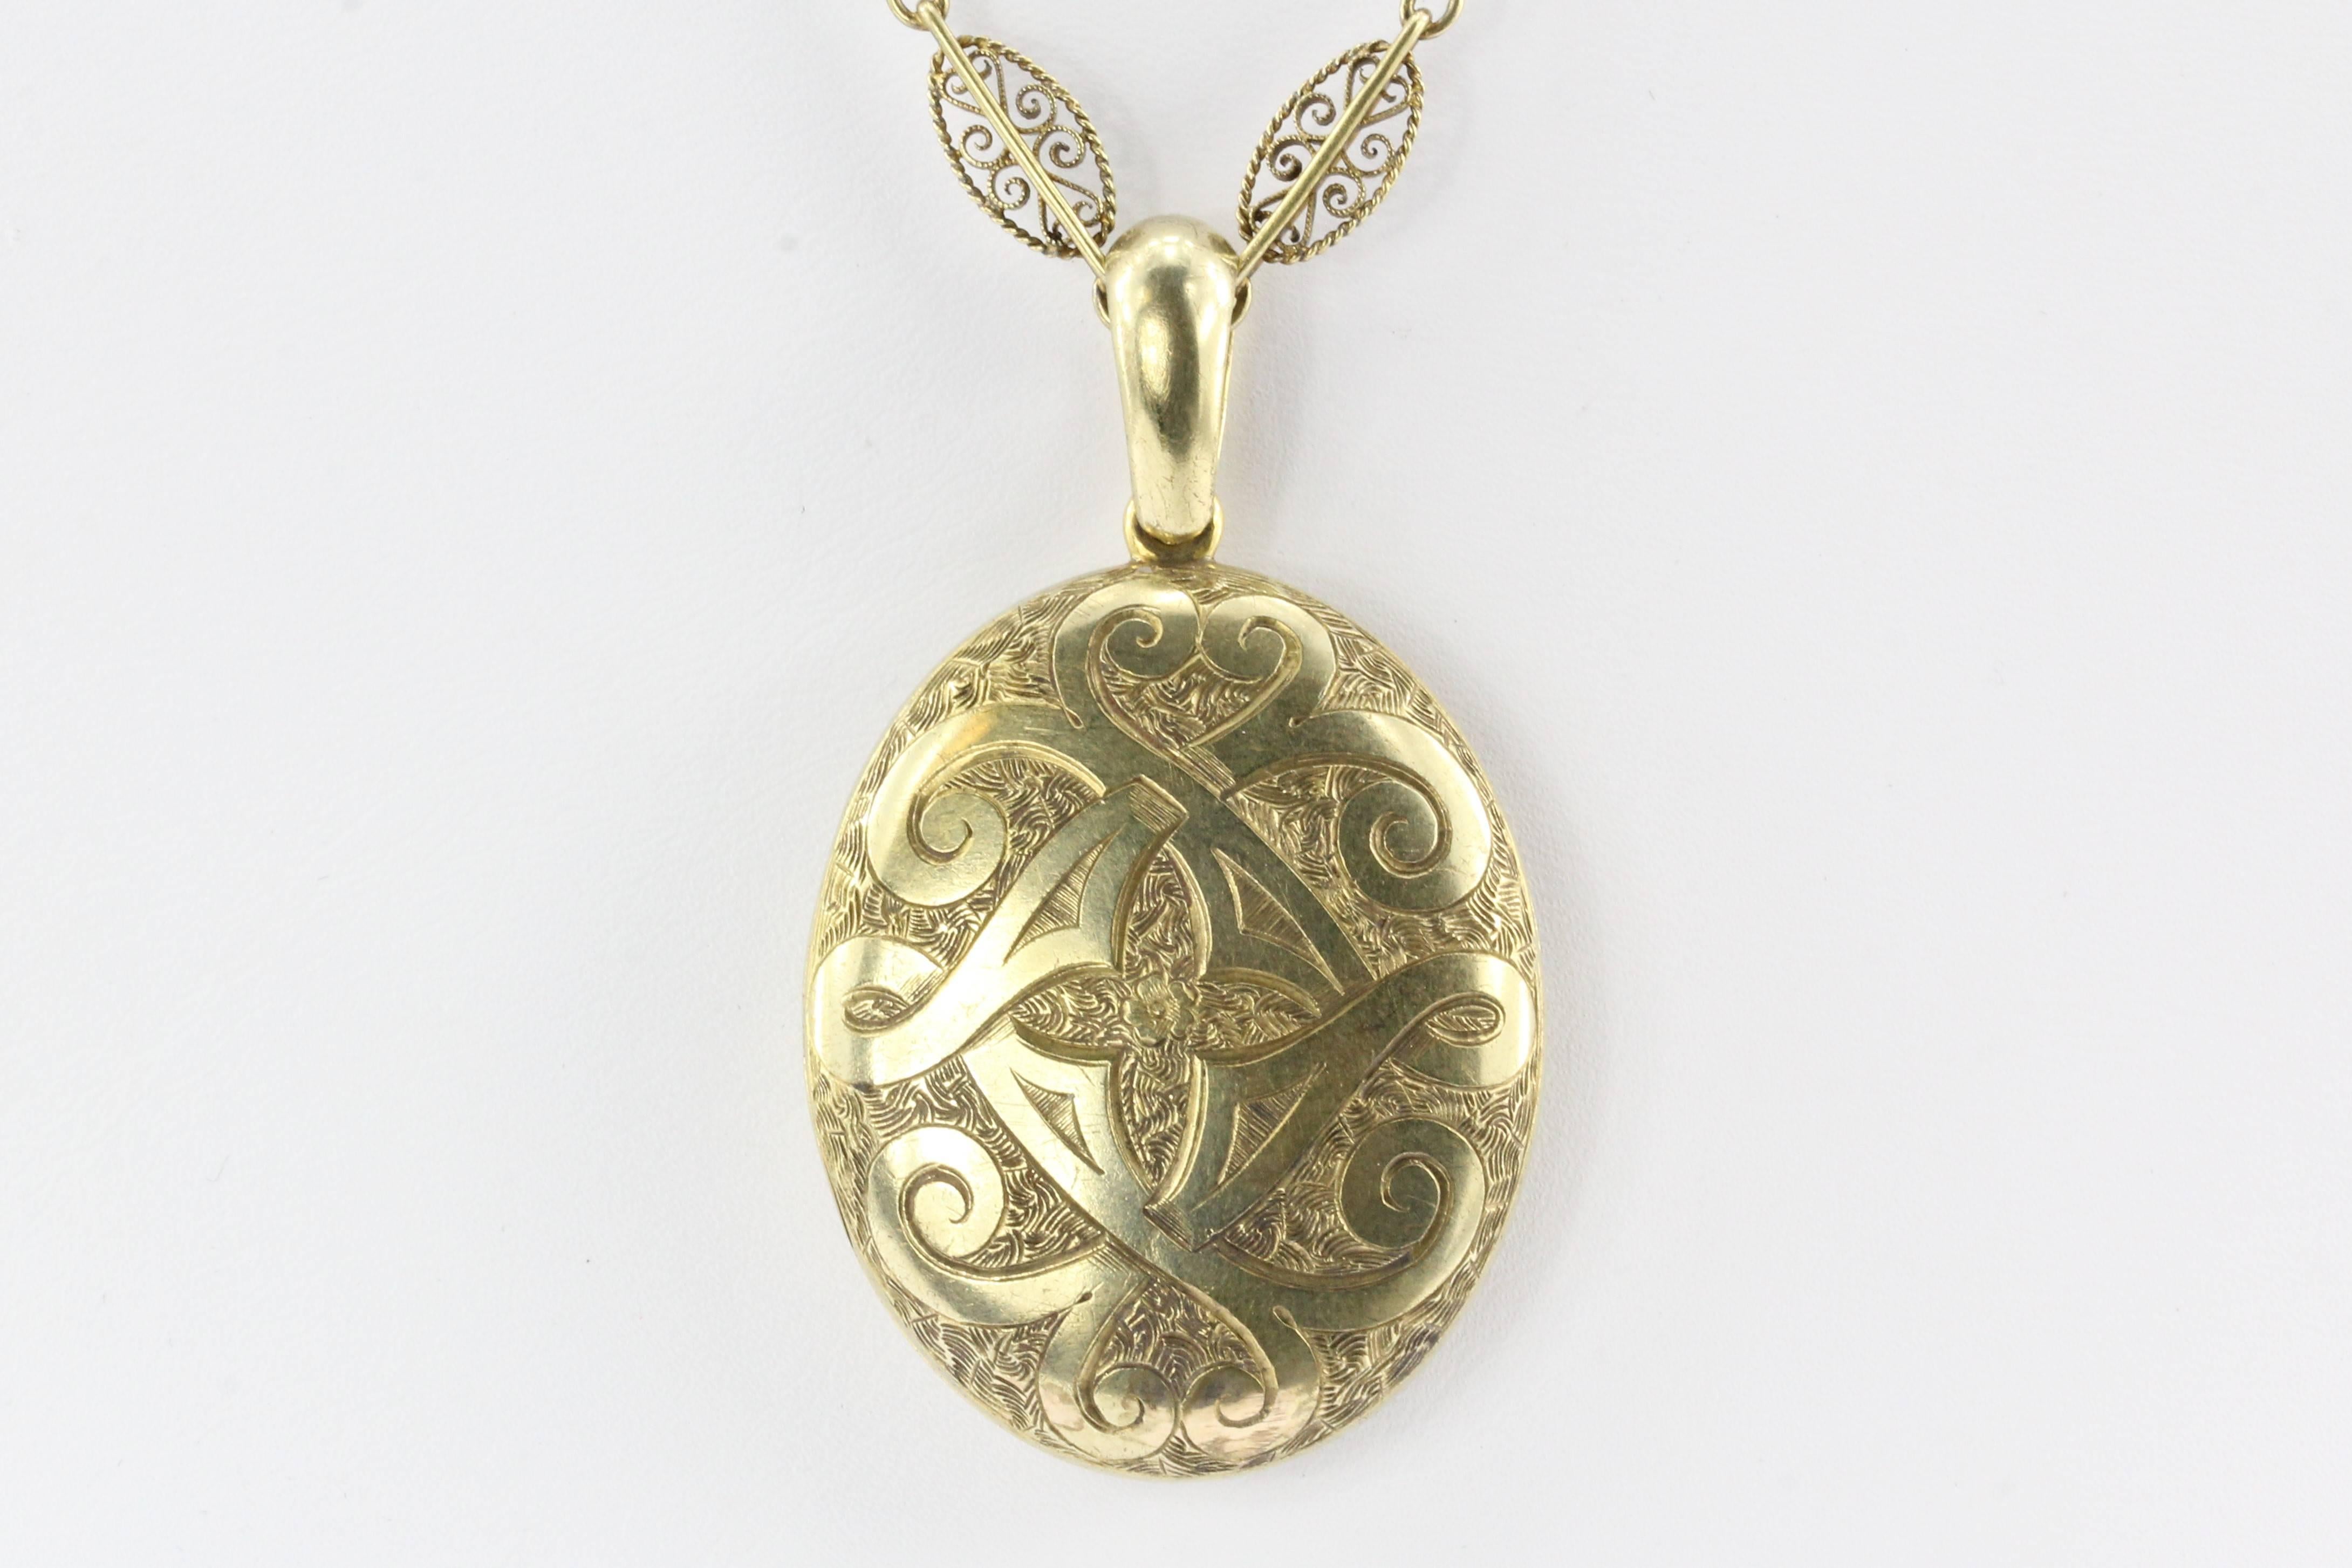 Late Victorian Victorian Gothic Revival Oval Gold Locket and Filigree Necklace, circa 1890